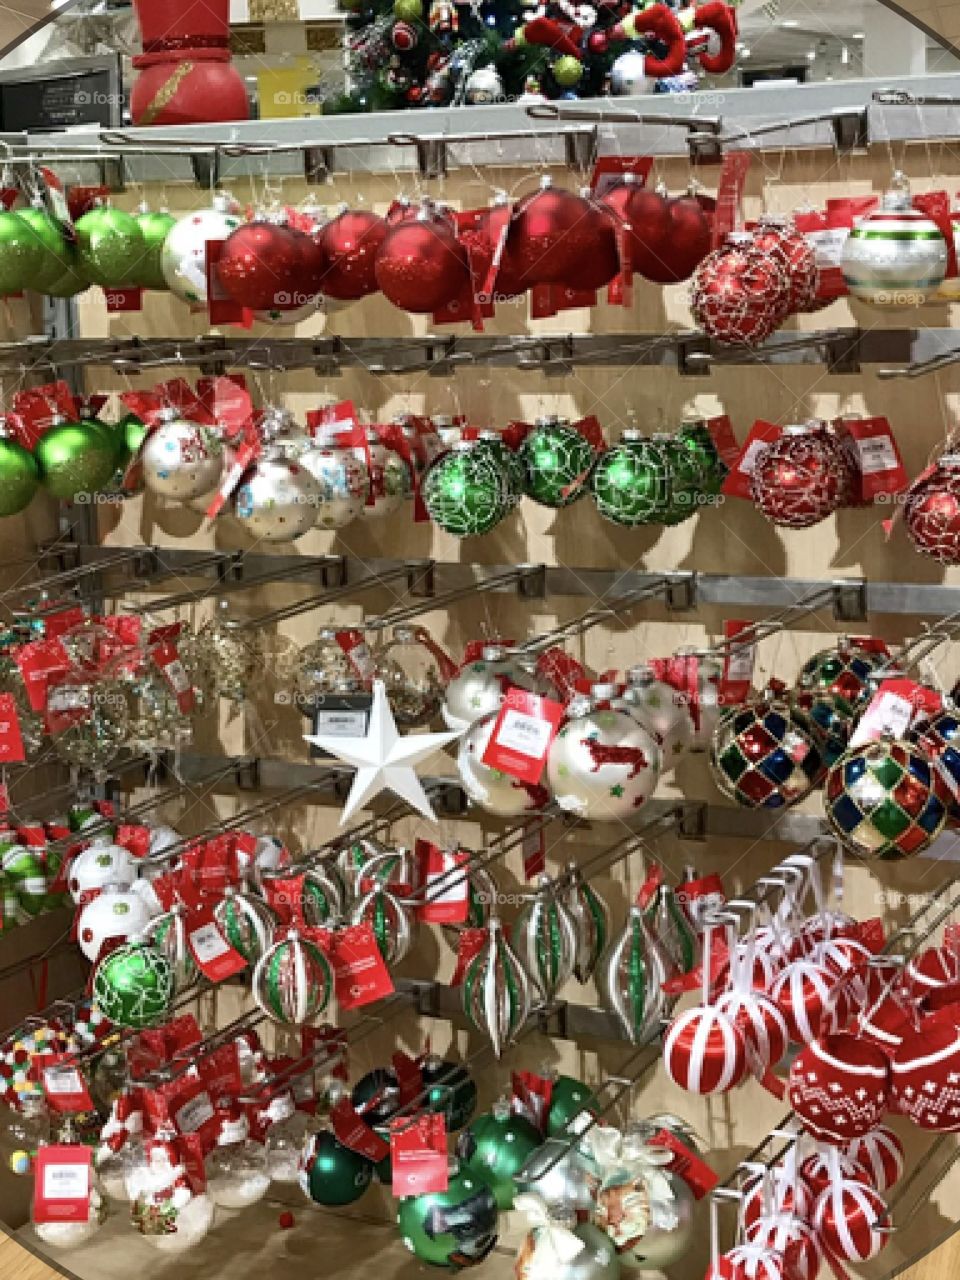 Christmas ornaments at Myer Westfield Southland Melbourne Australia 